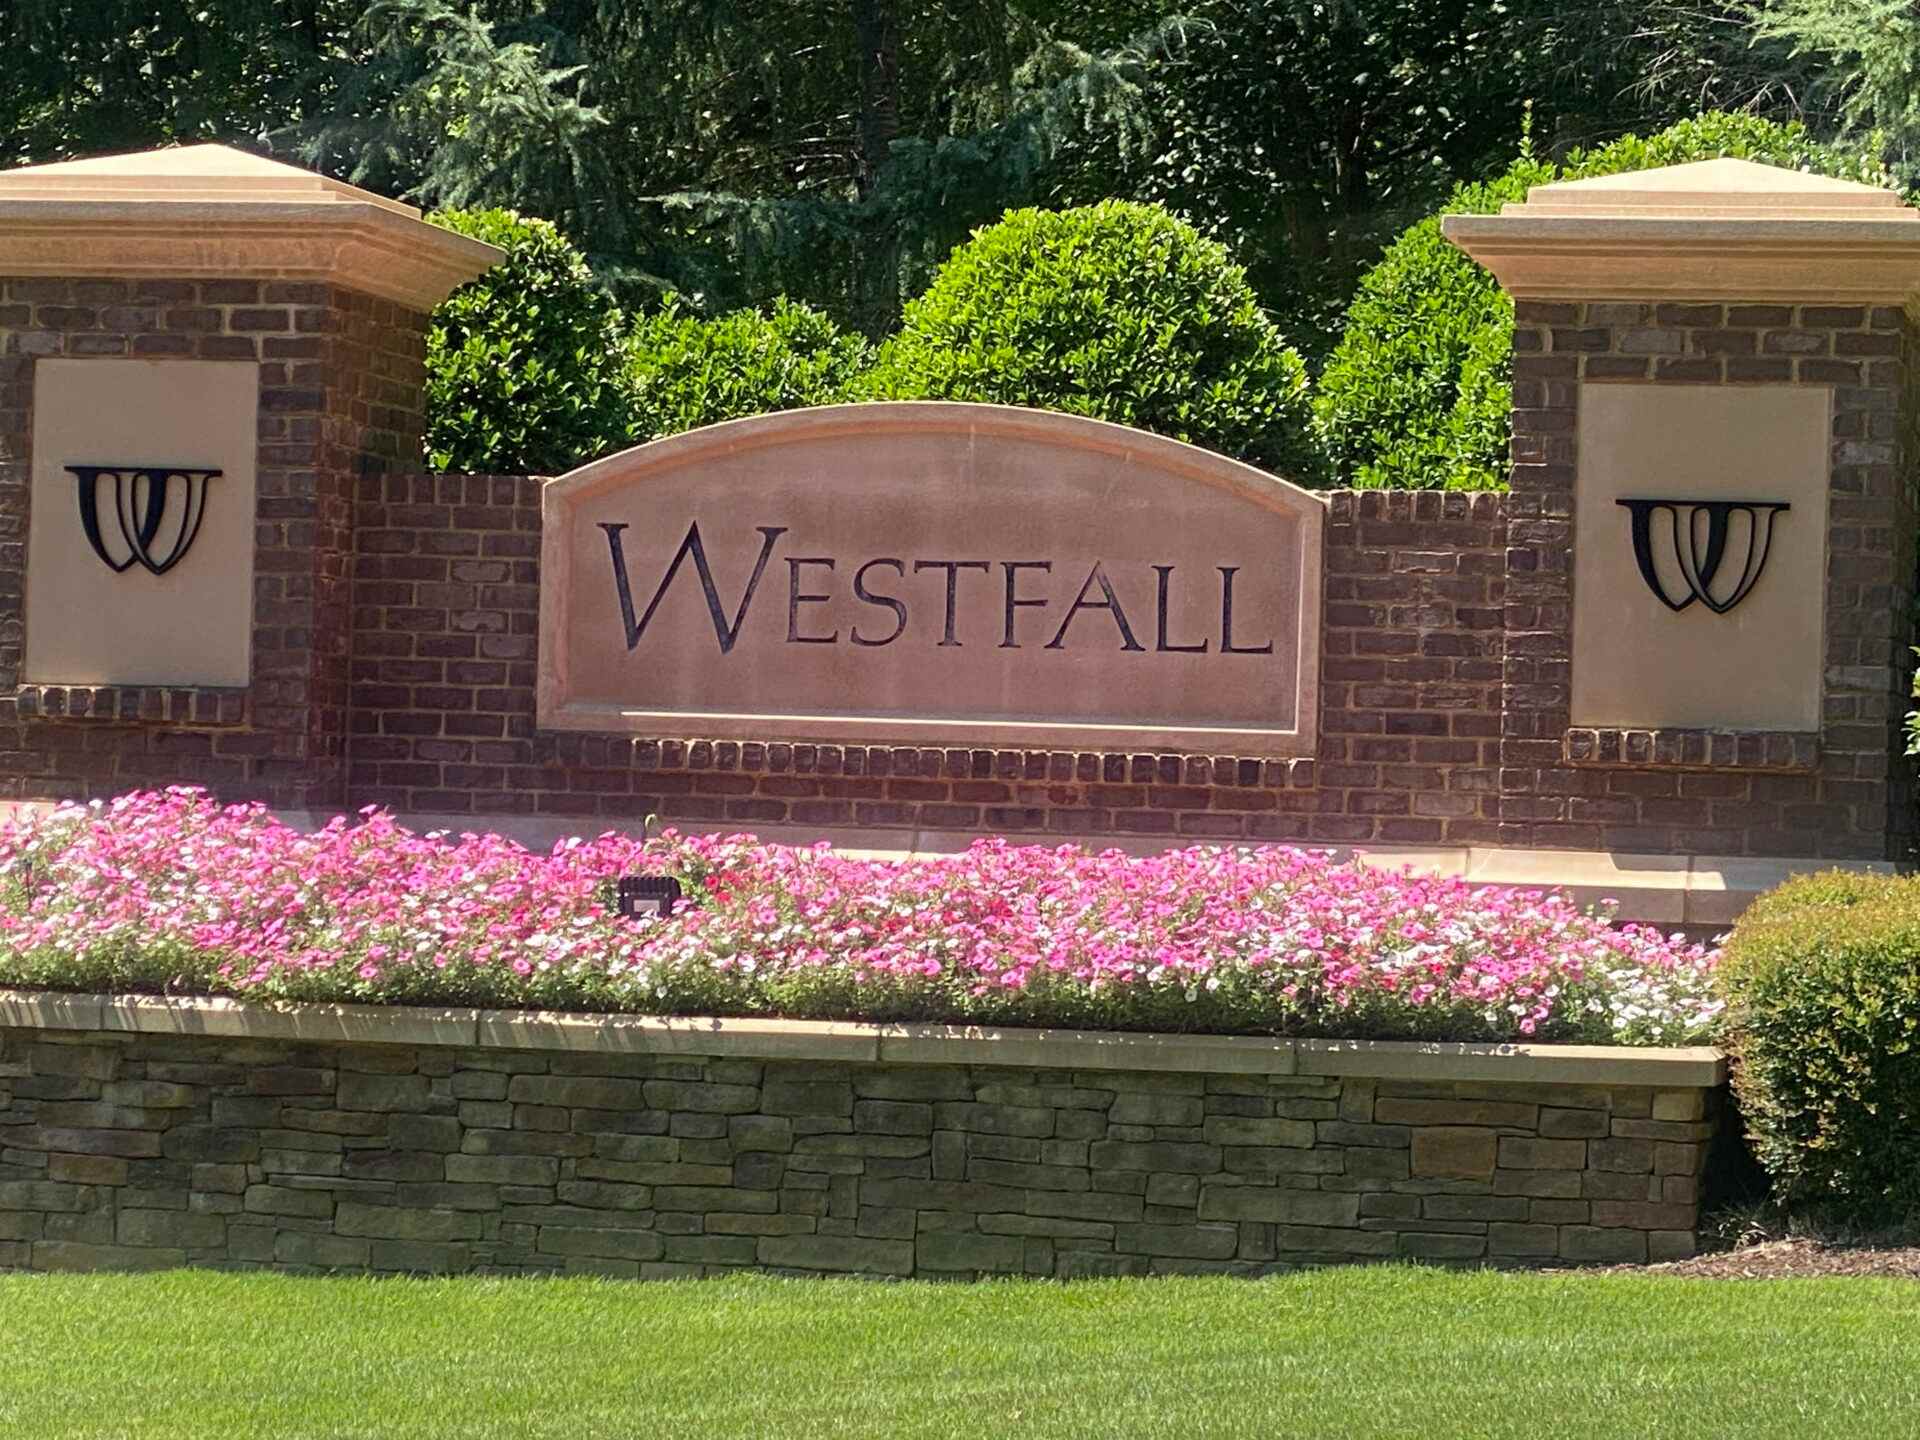 Westfall Name On a wall in a garden